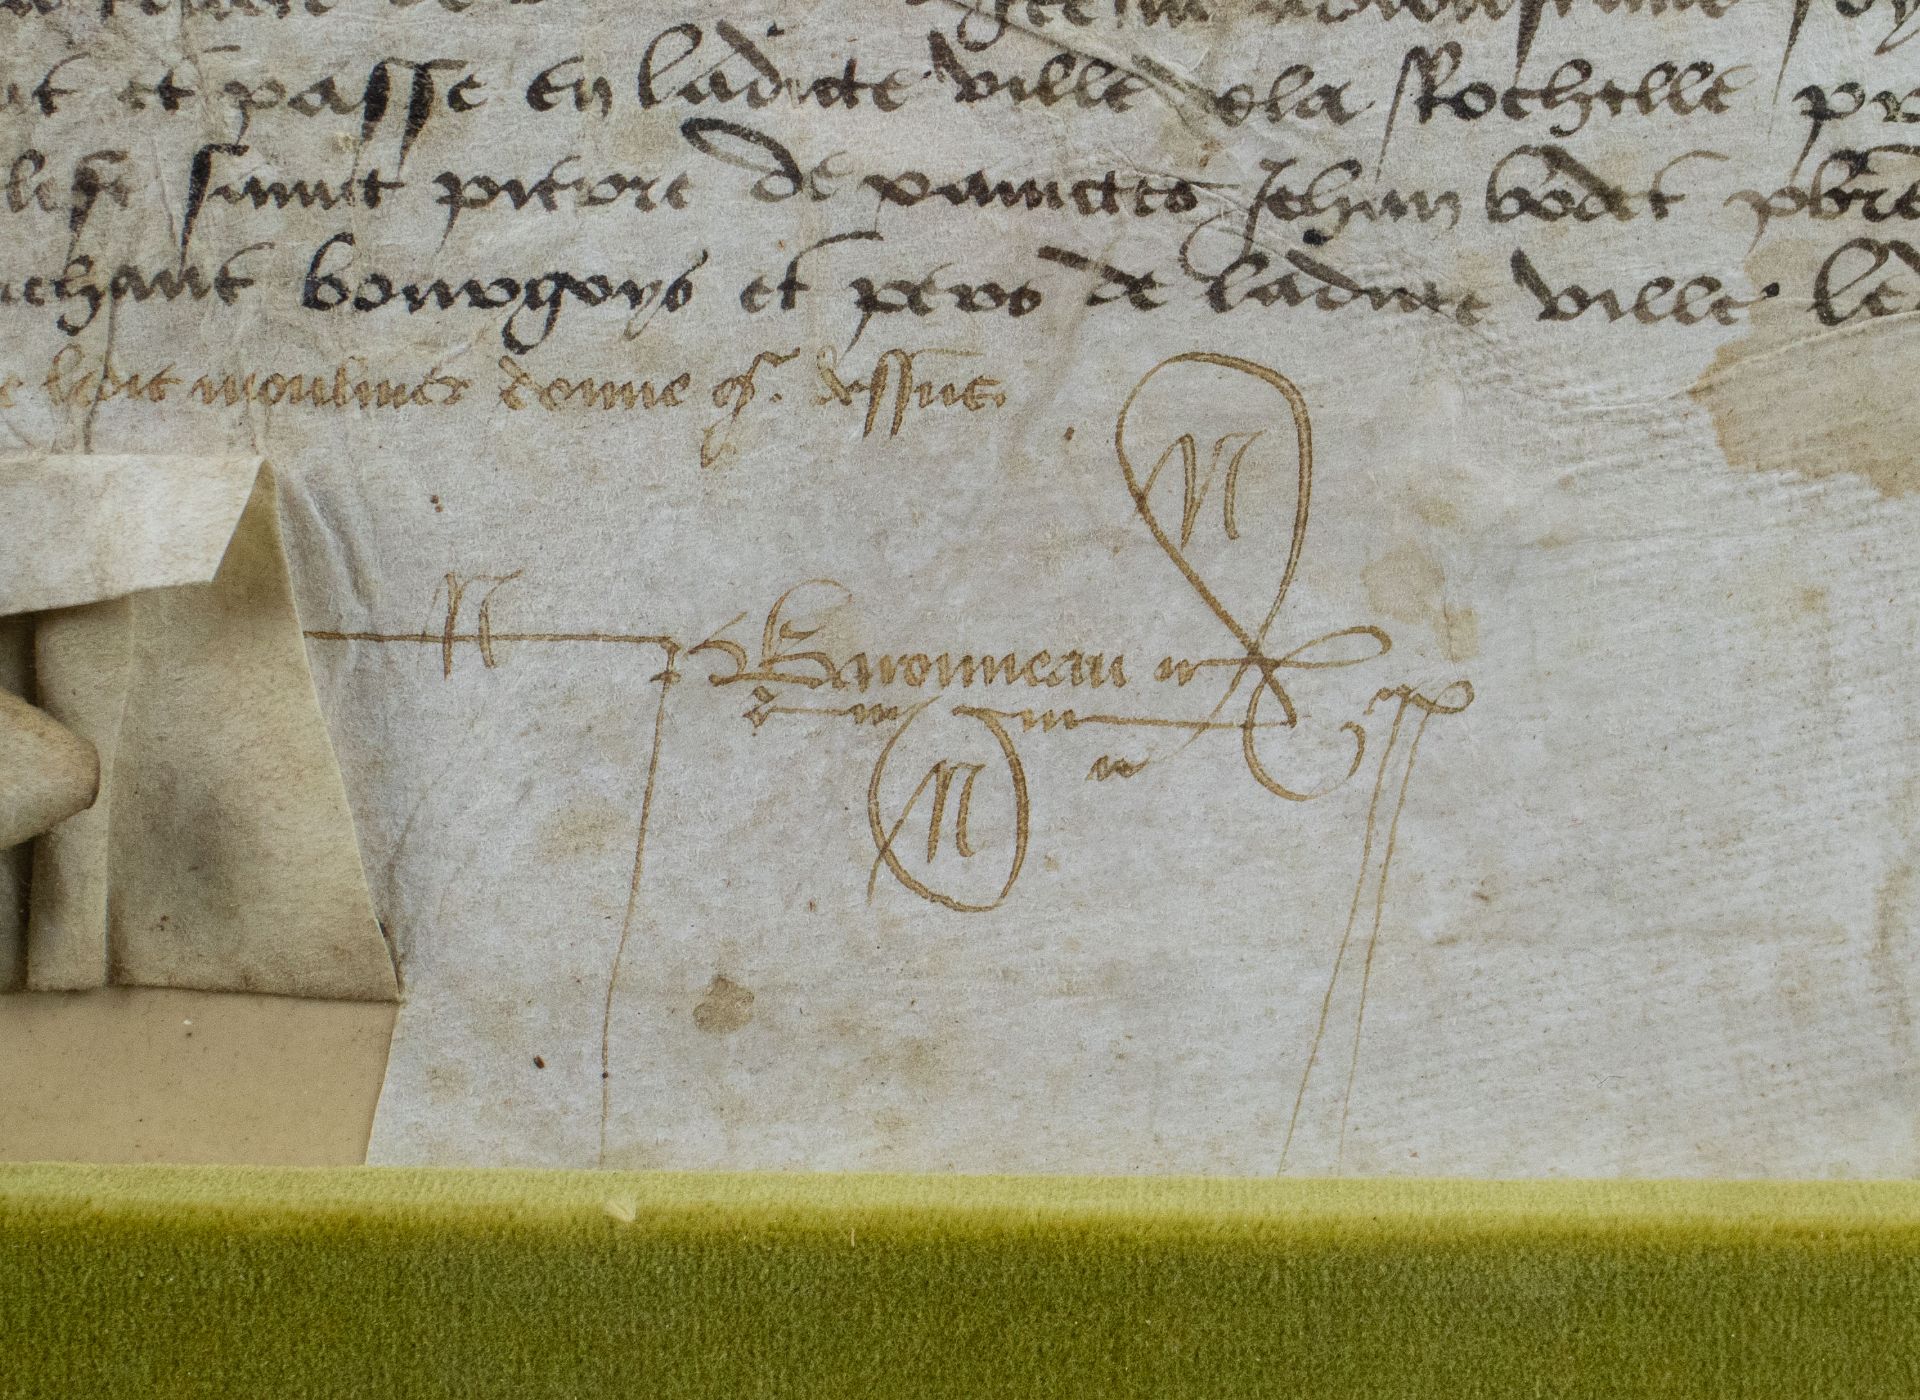 Perpetual interest deed 15th century - Image 2 of 2